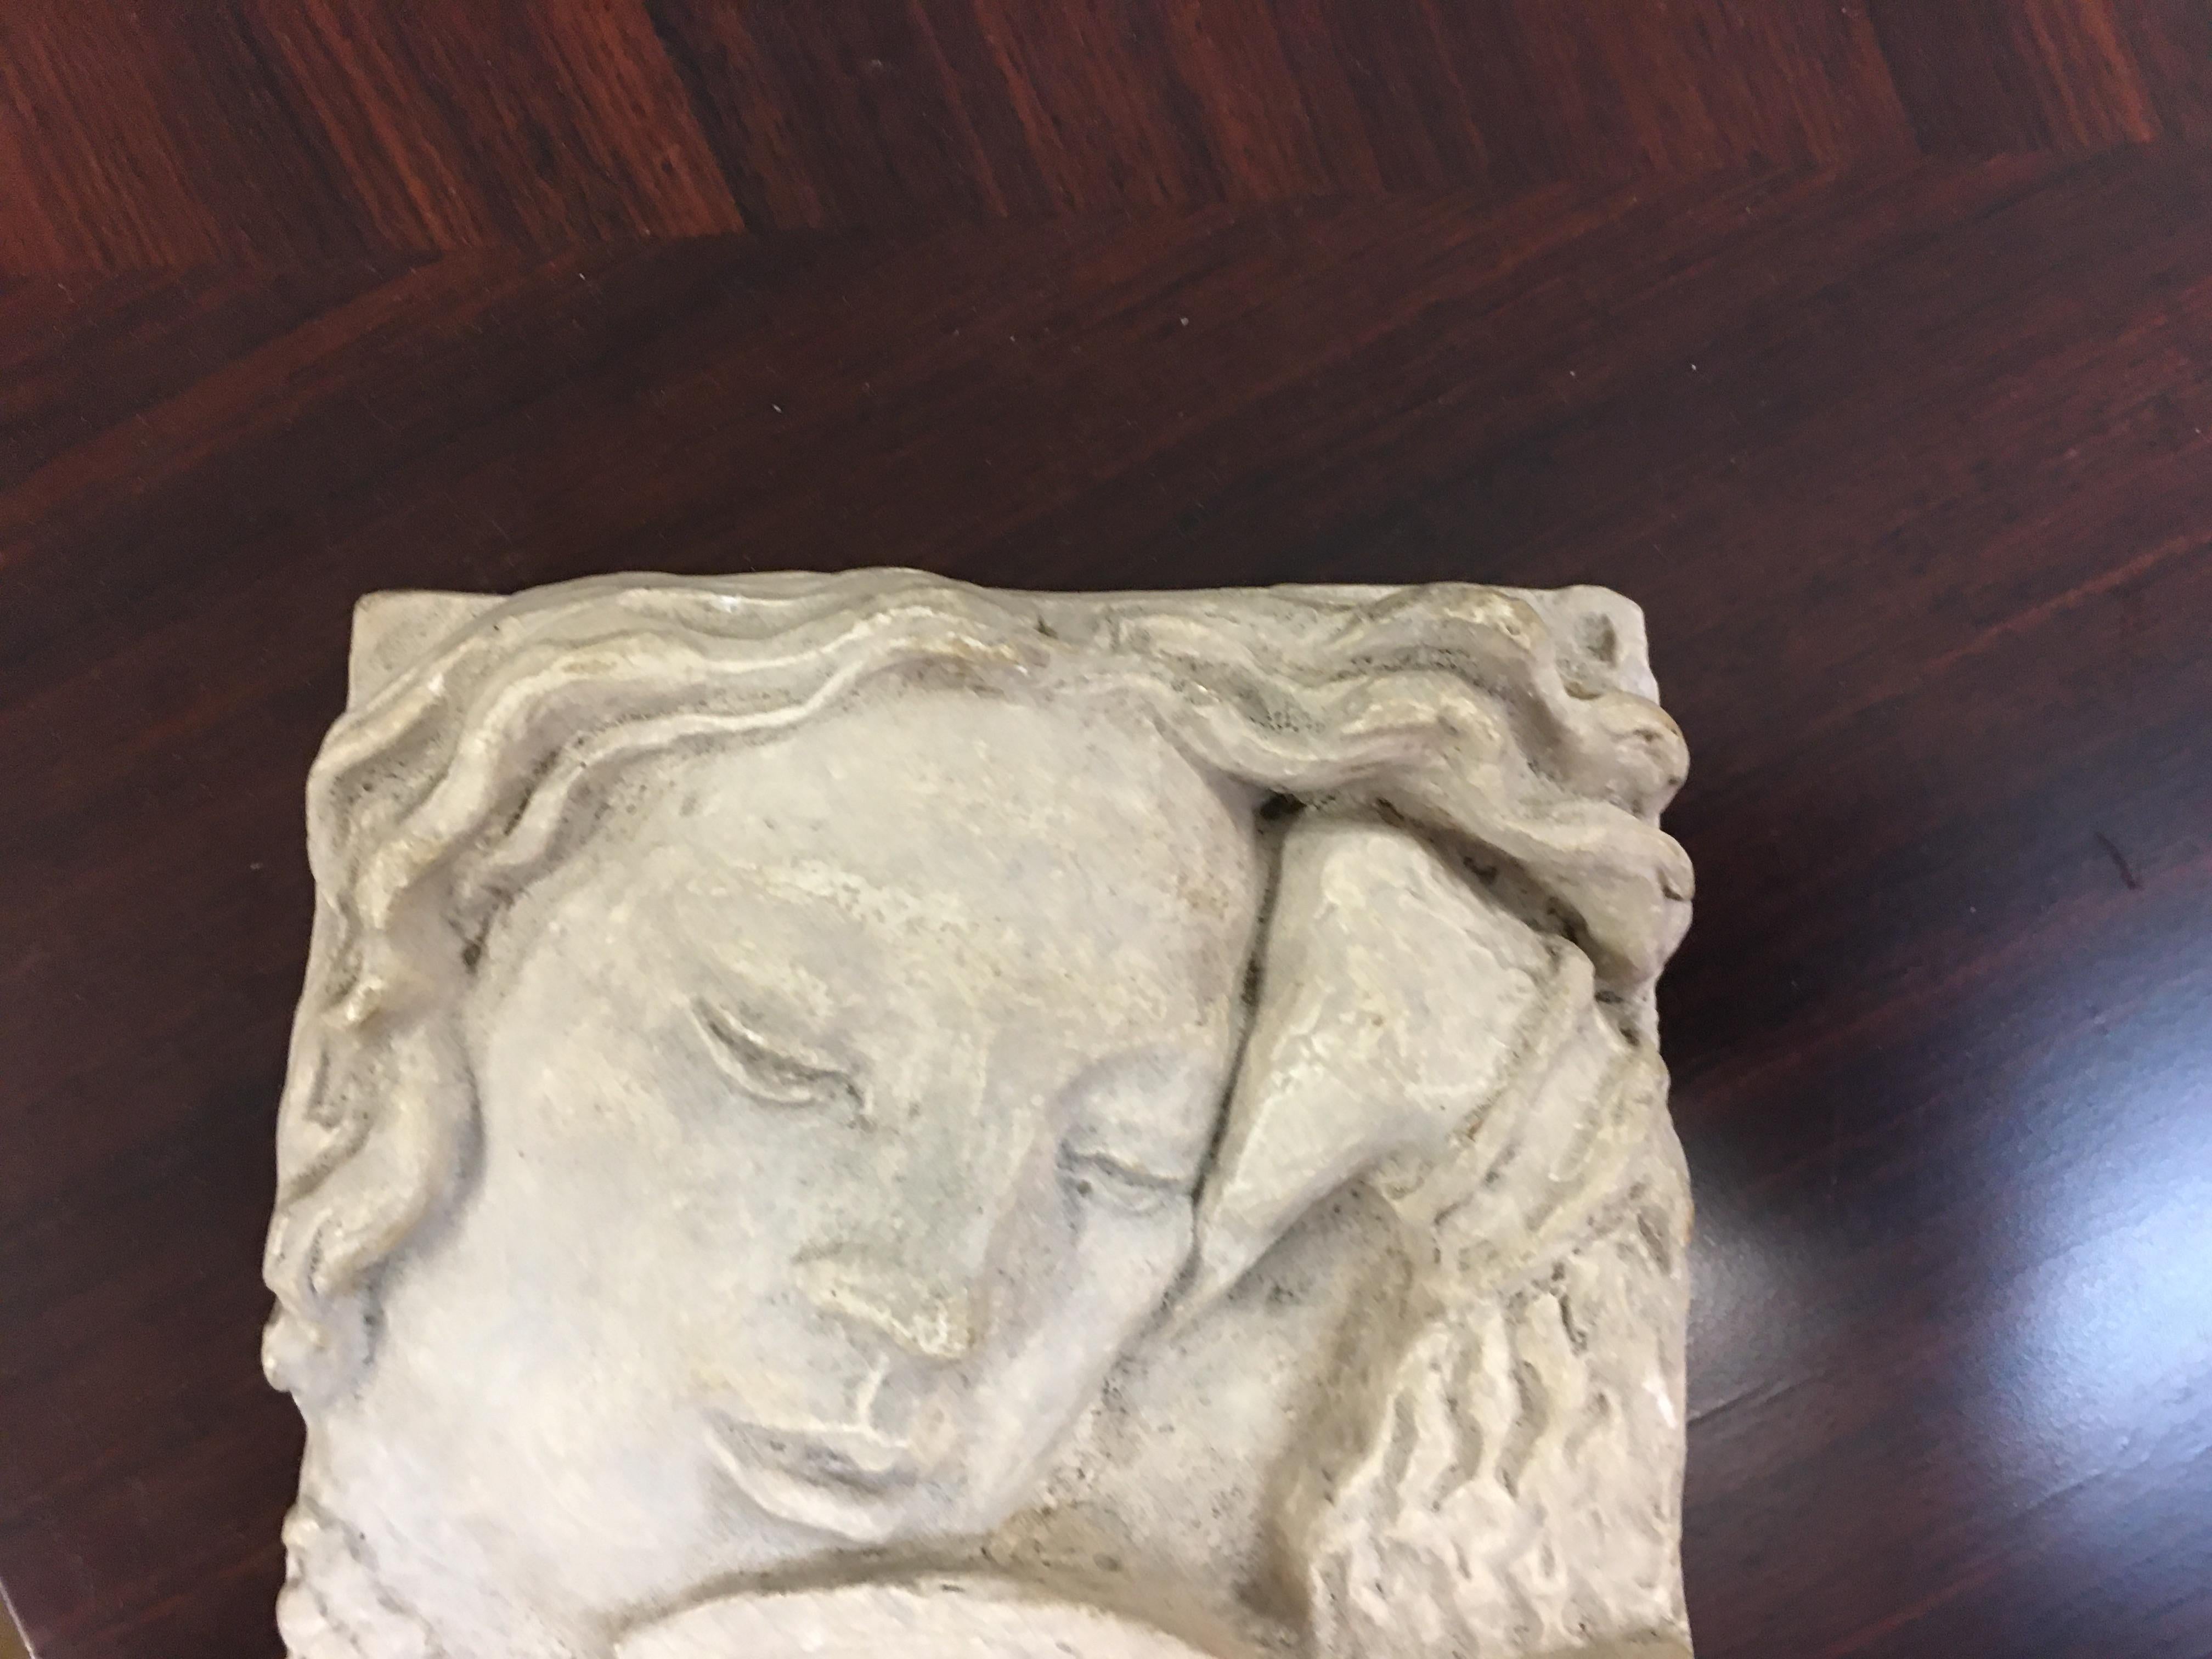  Small Art Deco Bas-Relief in Plaster, Signed,  G. WATKIN  1942 In Good Condition For Sale In Saint-Ouen, FR